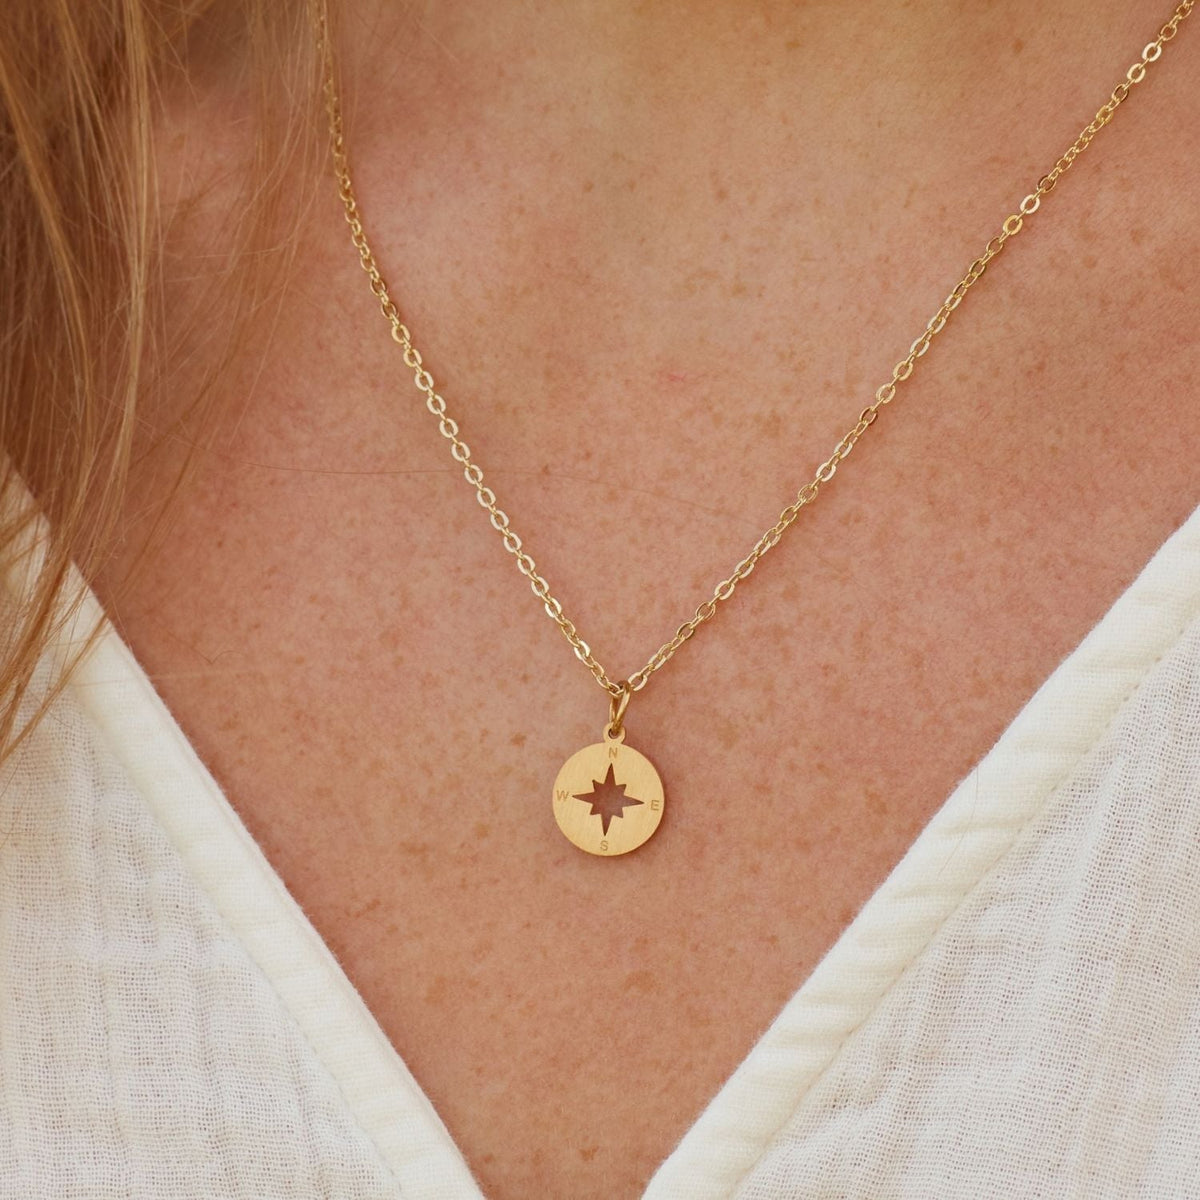 To My Beautiful Wife | Strongest, Bravest, Most Caring | Compass Necklace